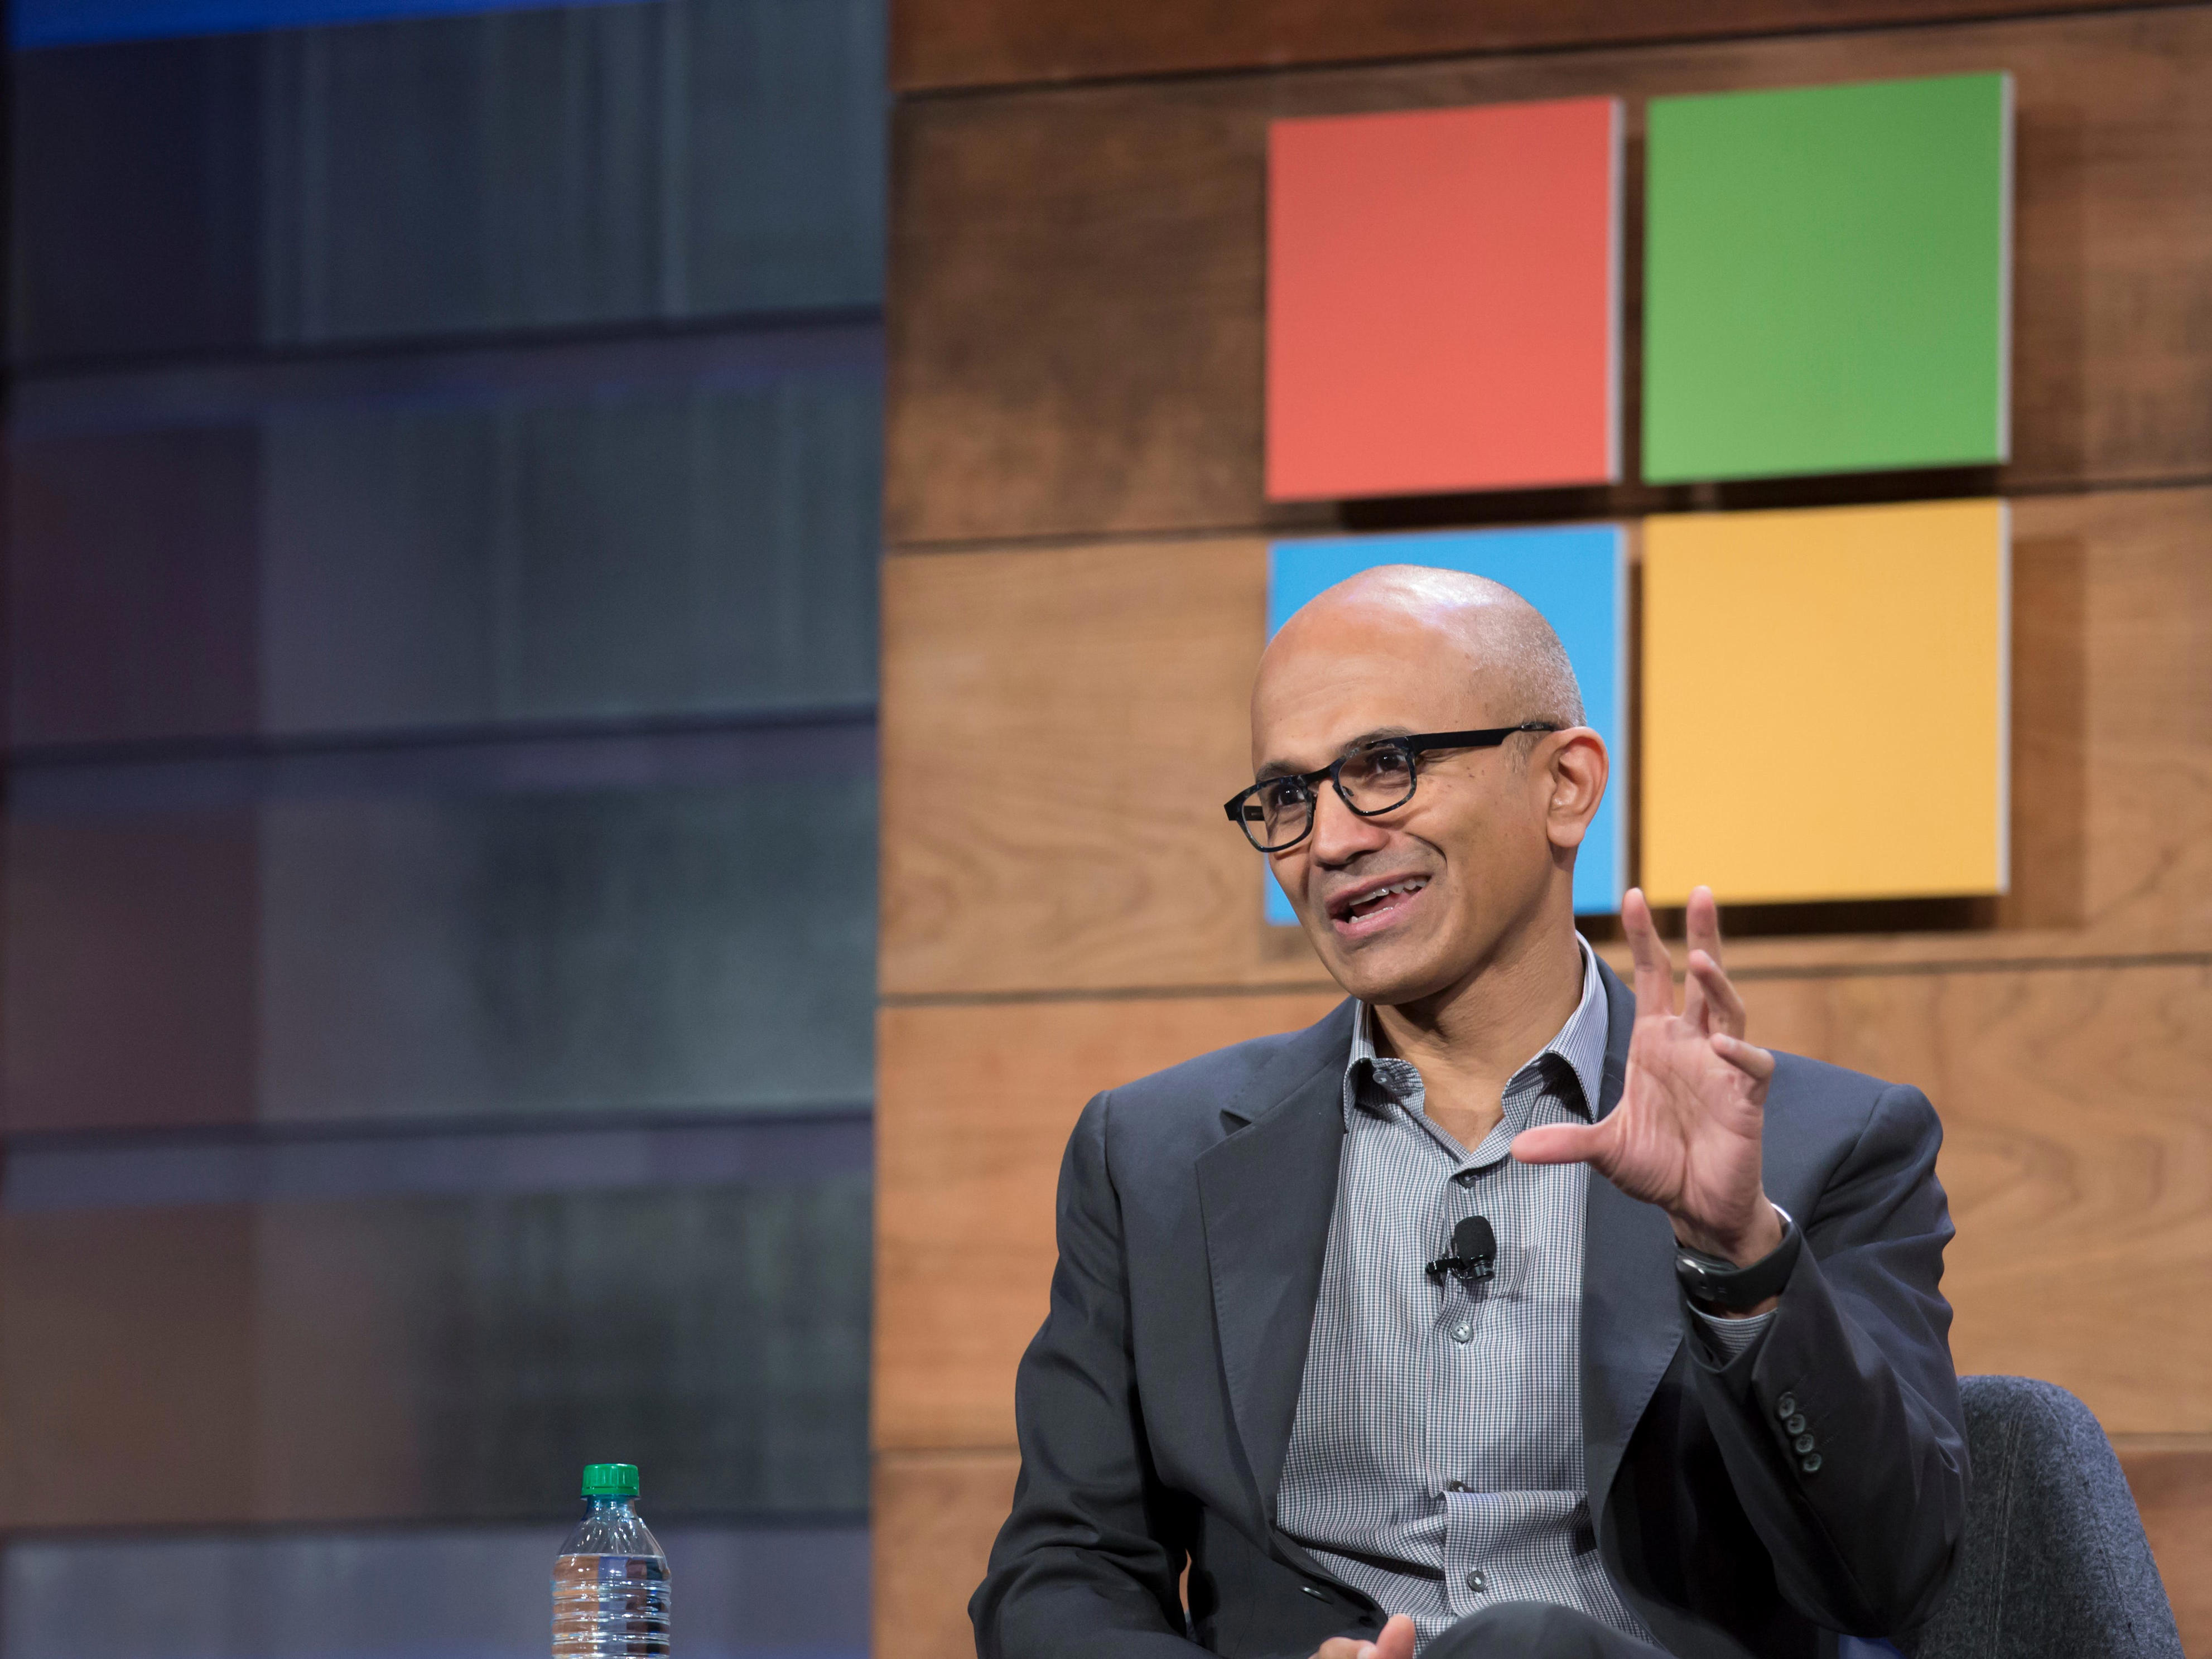 <p>Microsoft announced on January 18 that it planned to reduce its workforce by 10,000 jobs by the end of the third quarter of this year. </p><p>CEO Satya Nadella attributed the layoffs to customers cutting back in anticipation of a recession. </p><p>However, Nadella also told workers that the company still plans to grow in some areas, despite the firings, writing that the company will "continue to hire in key strategic areas." </p><p>Microsoft's layoff announcement comes as the tech giant is reportedly in talks <a href="https://www.businessinsider.com/chatgpt-microsoft-accessible-on-its-platforms-soon-2023-1">to invest $10 billion</a> in OpenAI, which created the AI chatbot ChatGPT. </p>